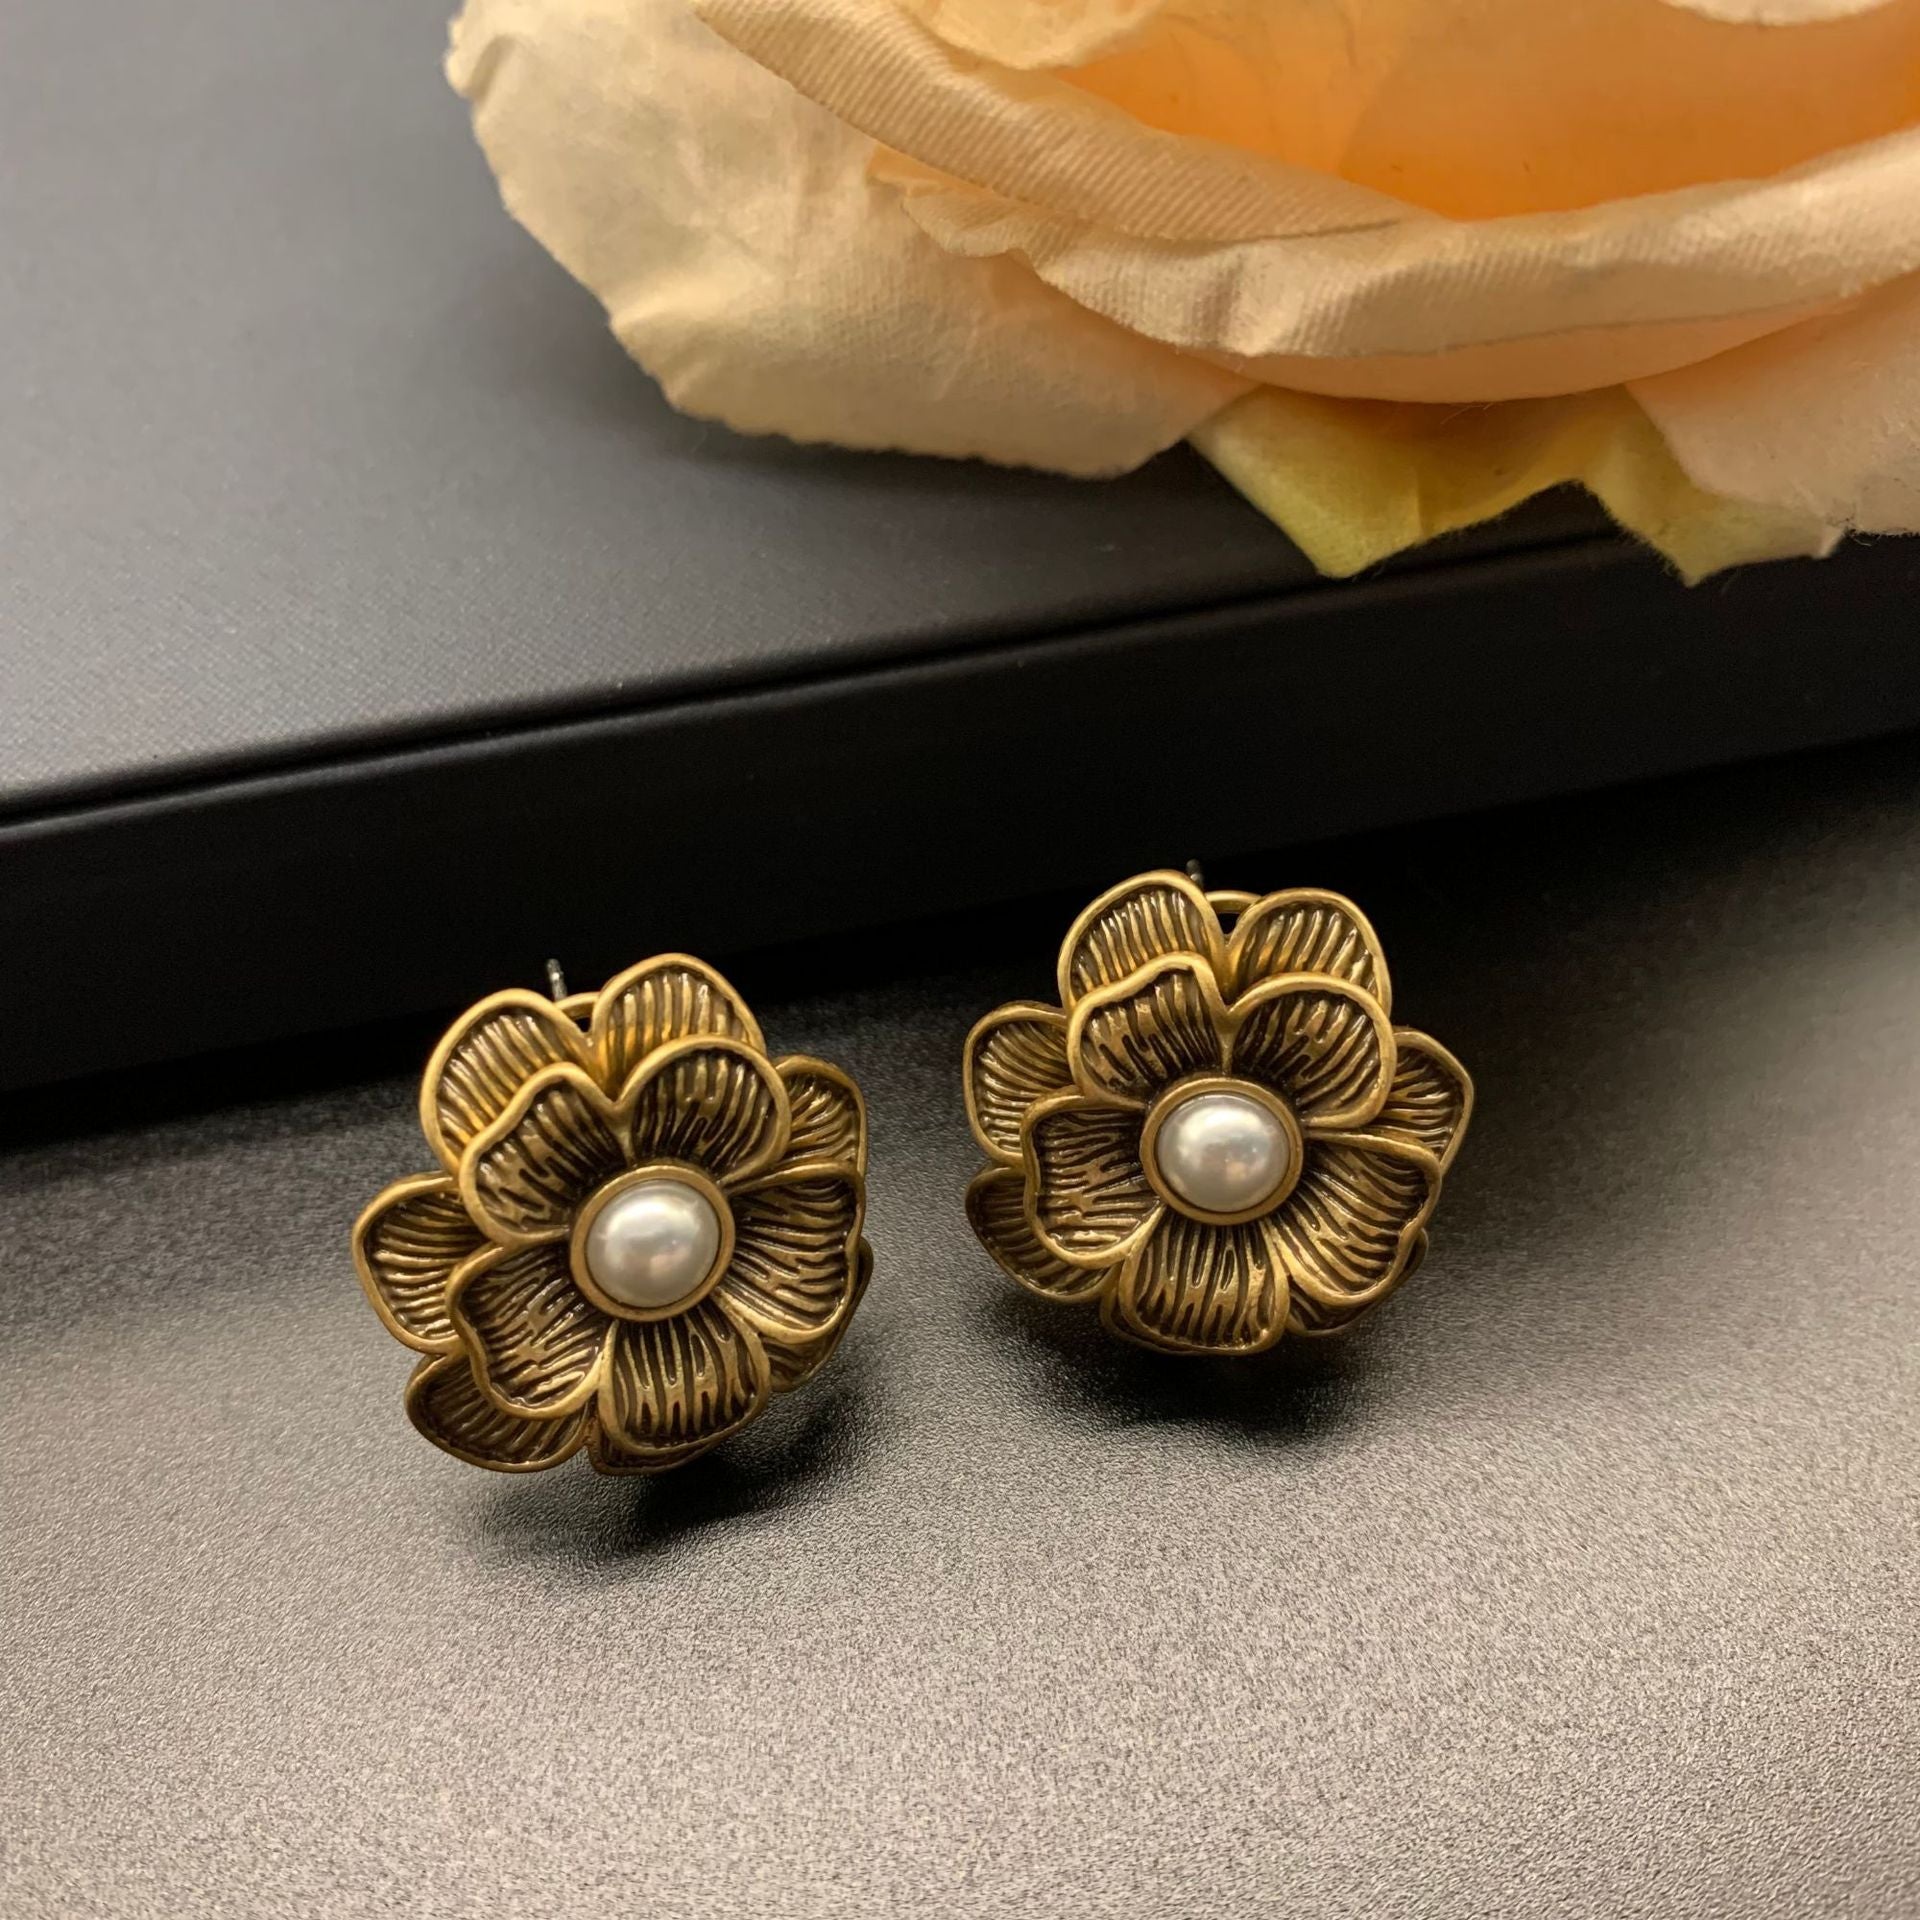 Vintage-Inspired Pure Copper Floral Earrings  UponBasics Golden  